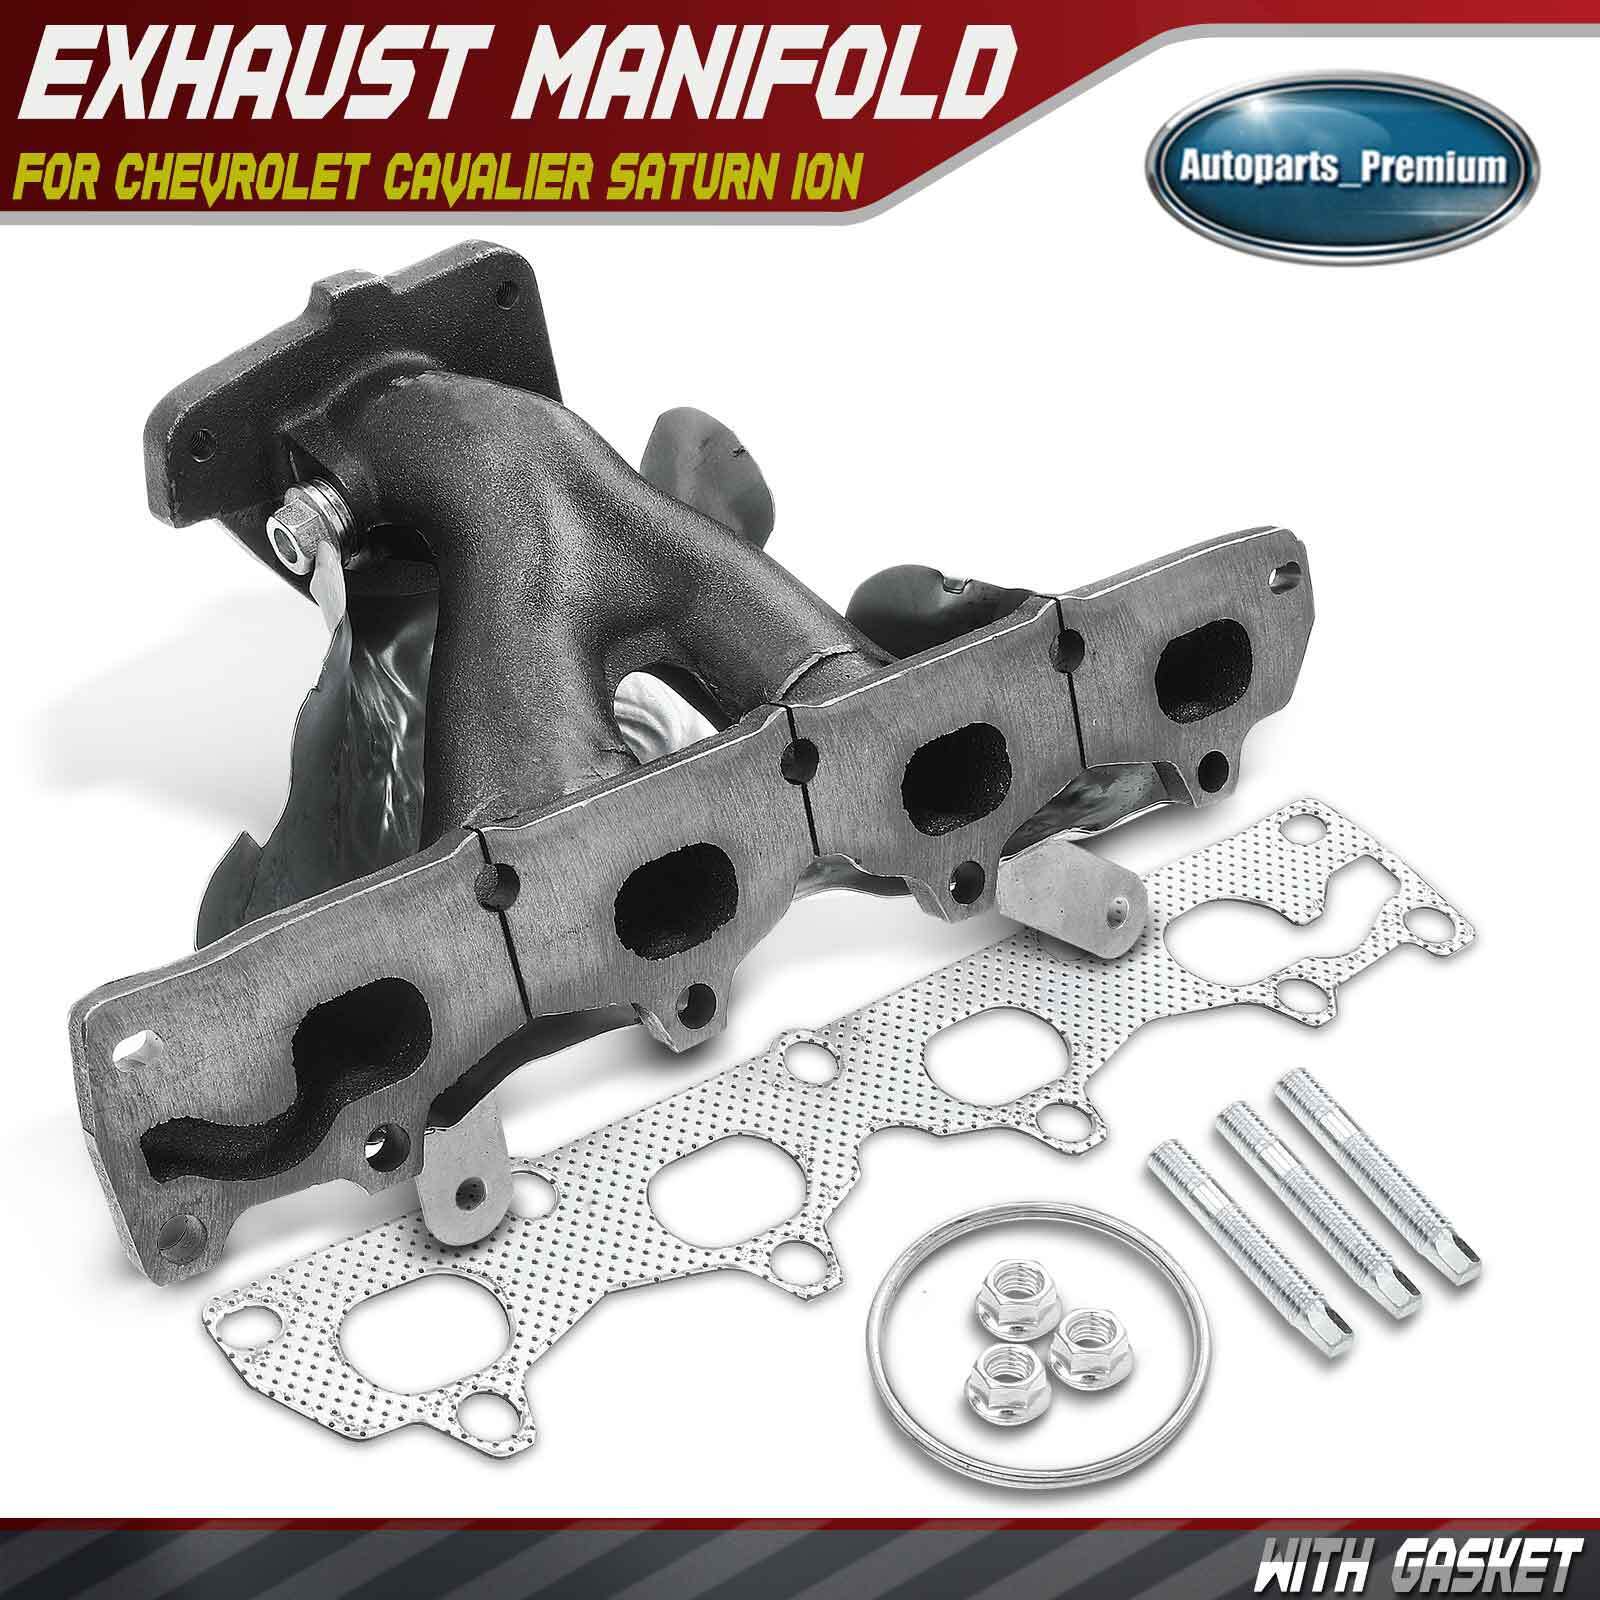 Exhaust Manifold w/ Gasket for Chevrolet Cavalier 2002-2005 Saturn Ion 2003-2007